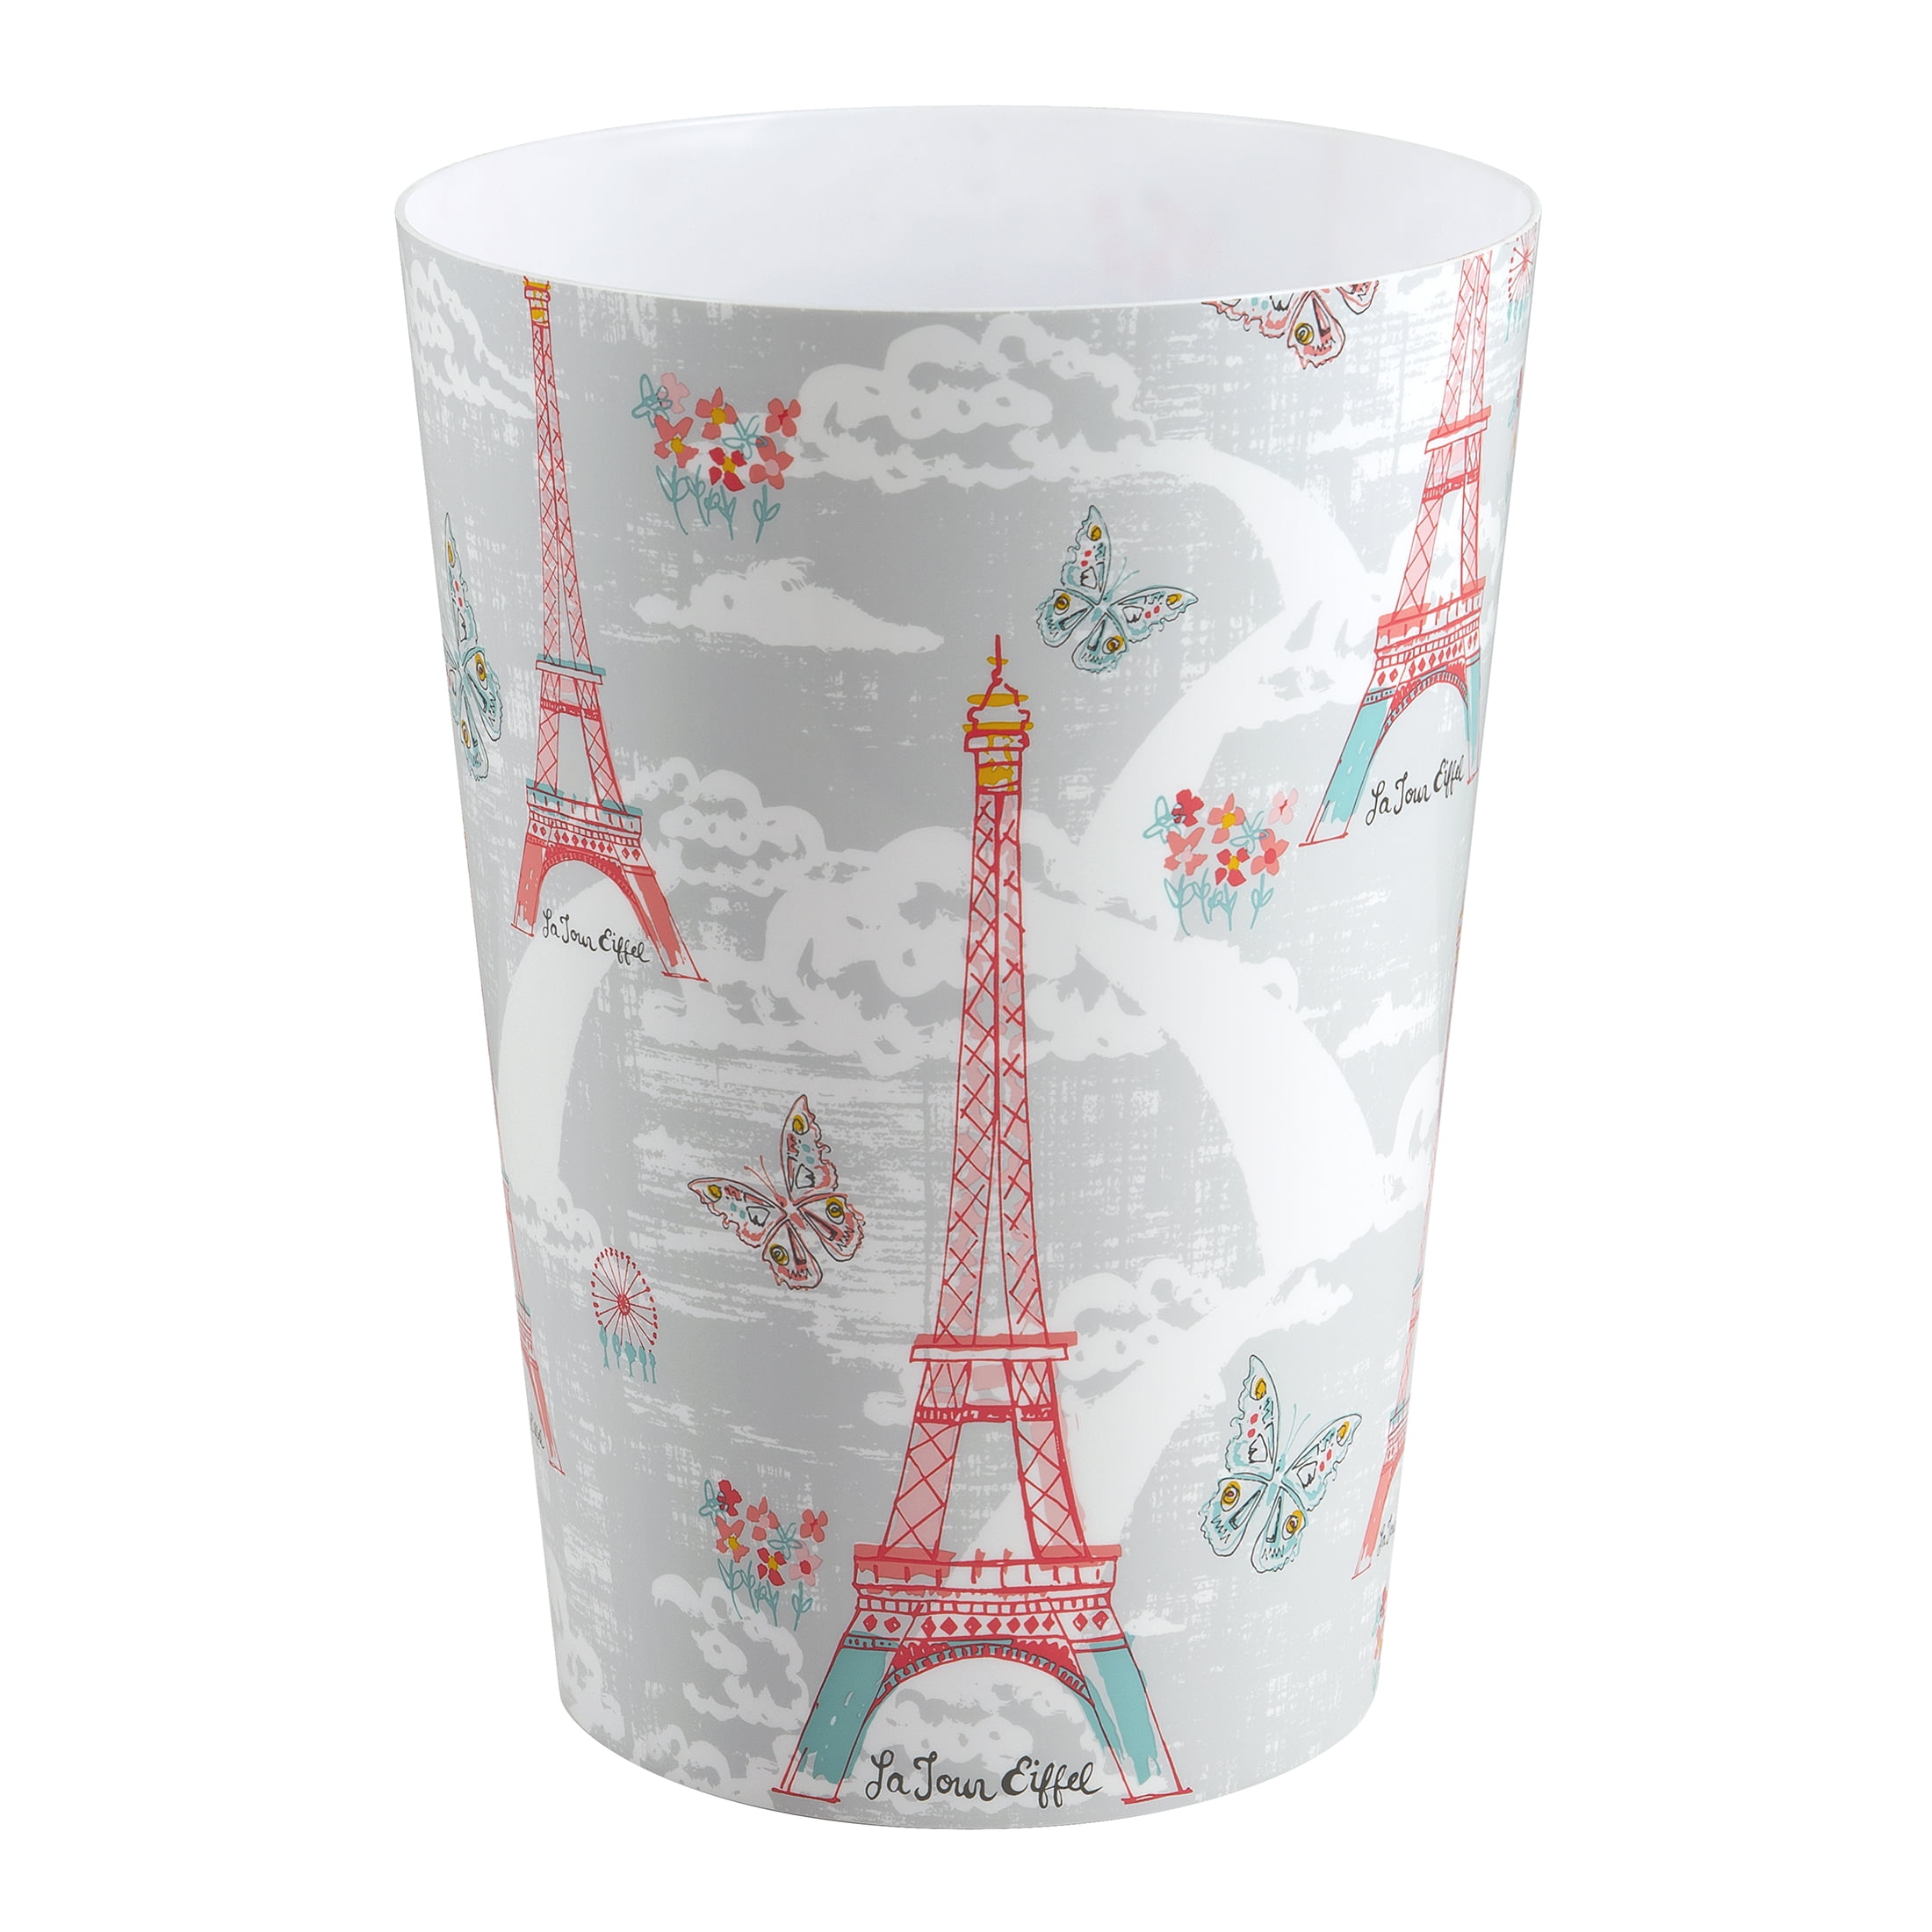 Paris Rounded Decaled Plastic Bathroom Trash Can by Your Zone, Multi